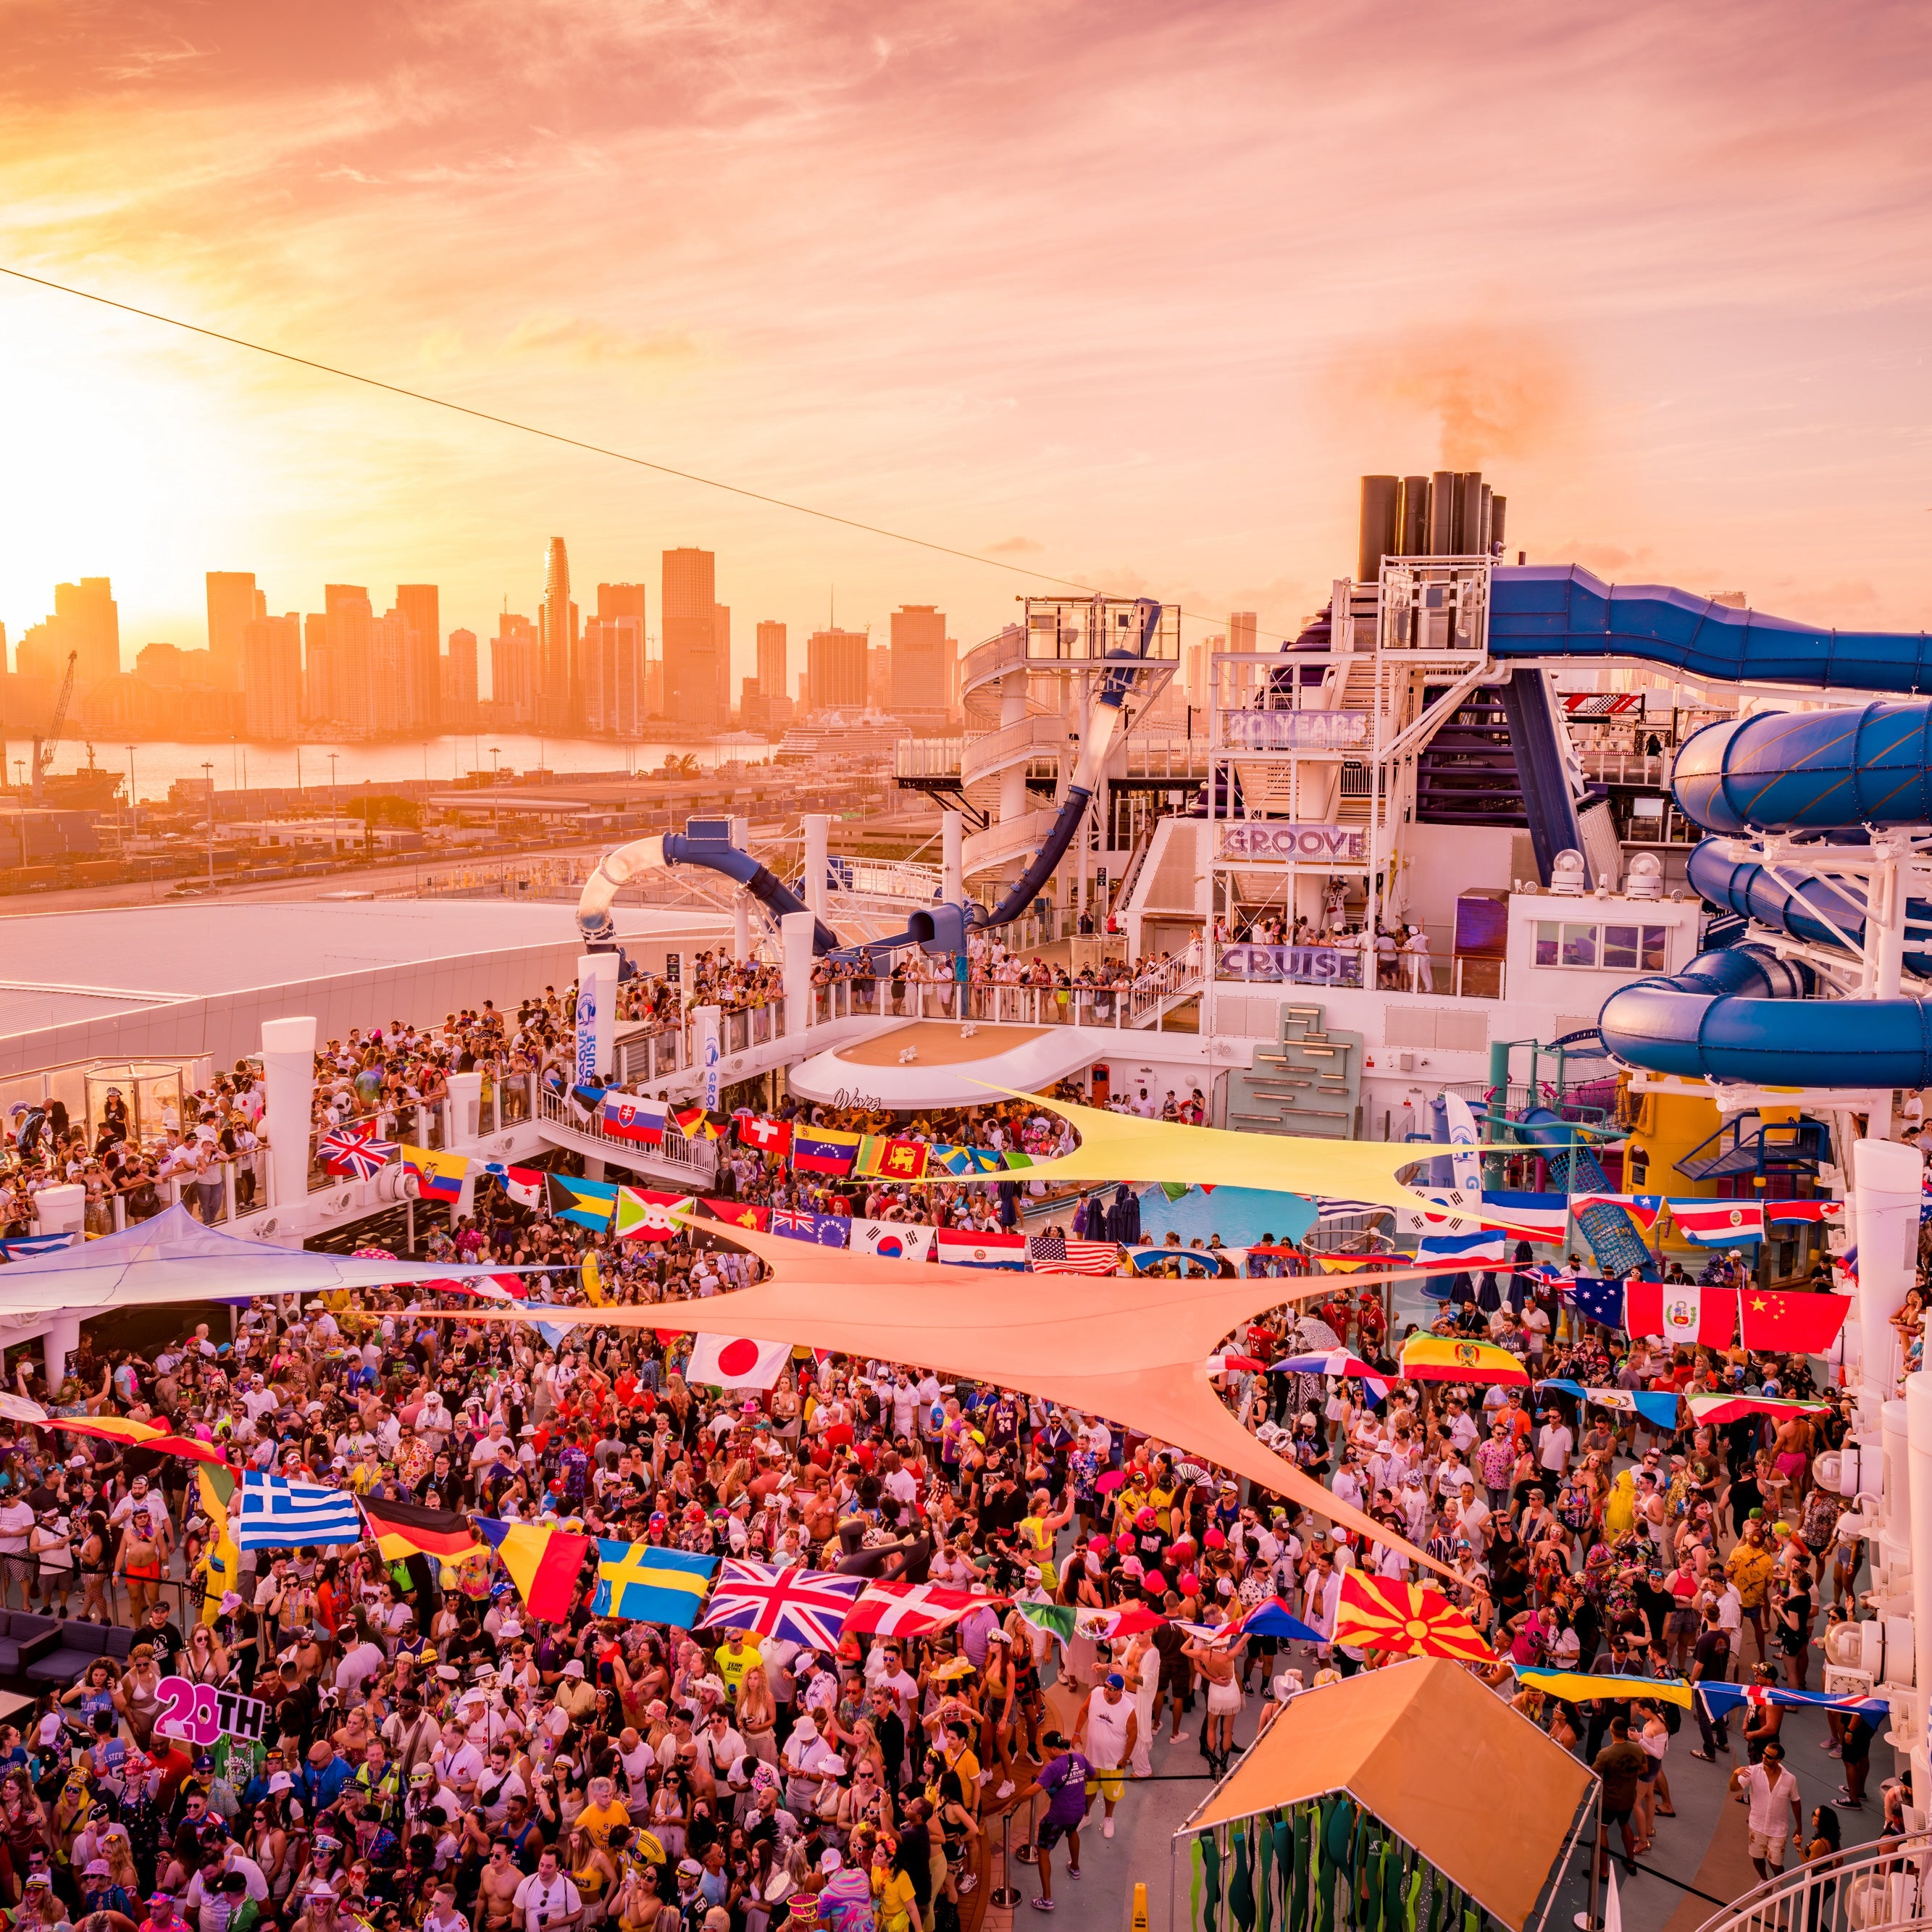 [FESTIVAL REVIEW] Groove Cruise's 20th Anniversary Sailing: An Unrivaled Music-Powered Getaway